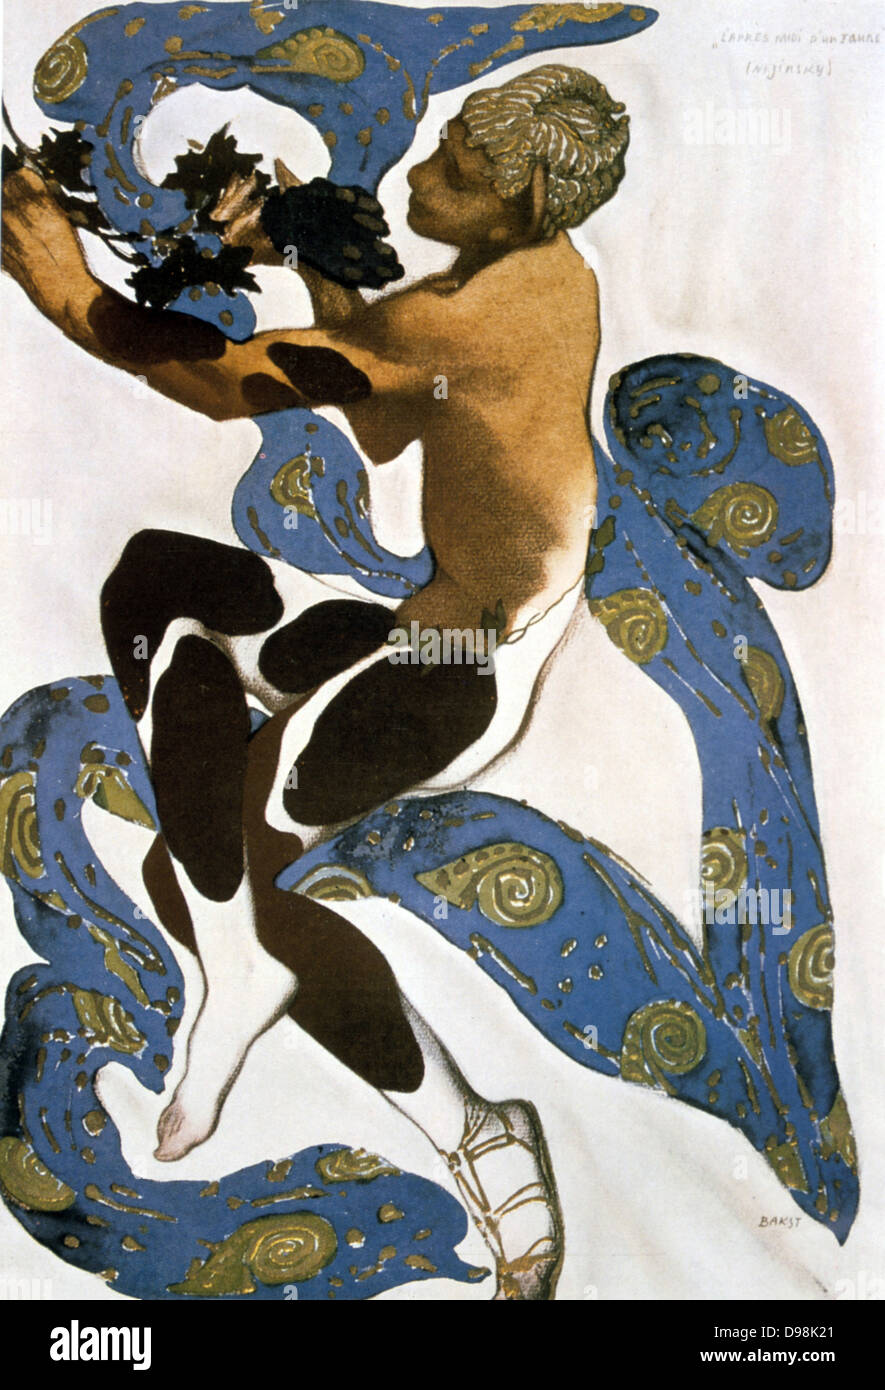 Design by Leon Bakst (1866-1924) Russian theatre and ballet designer, for Nijinsky in 'L'apres midi d'un faune', music by Claude Debussy. Produced in 1912 by Sergei Diaghilev's Ballets Russes. Stock Photo